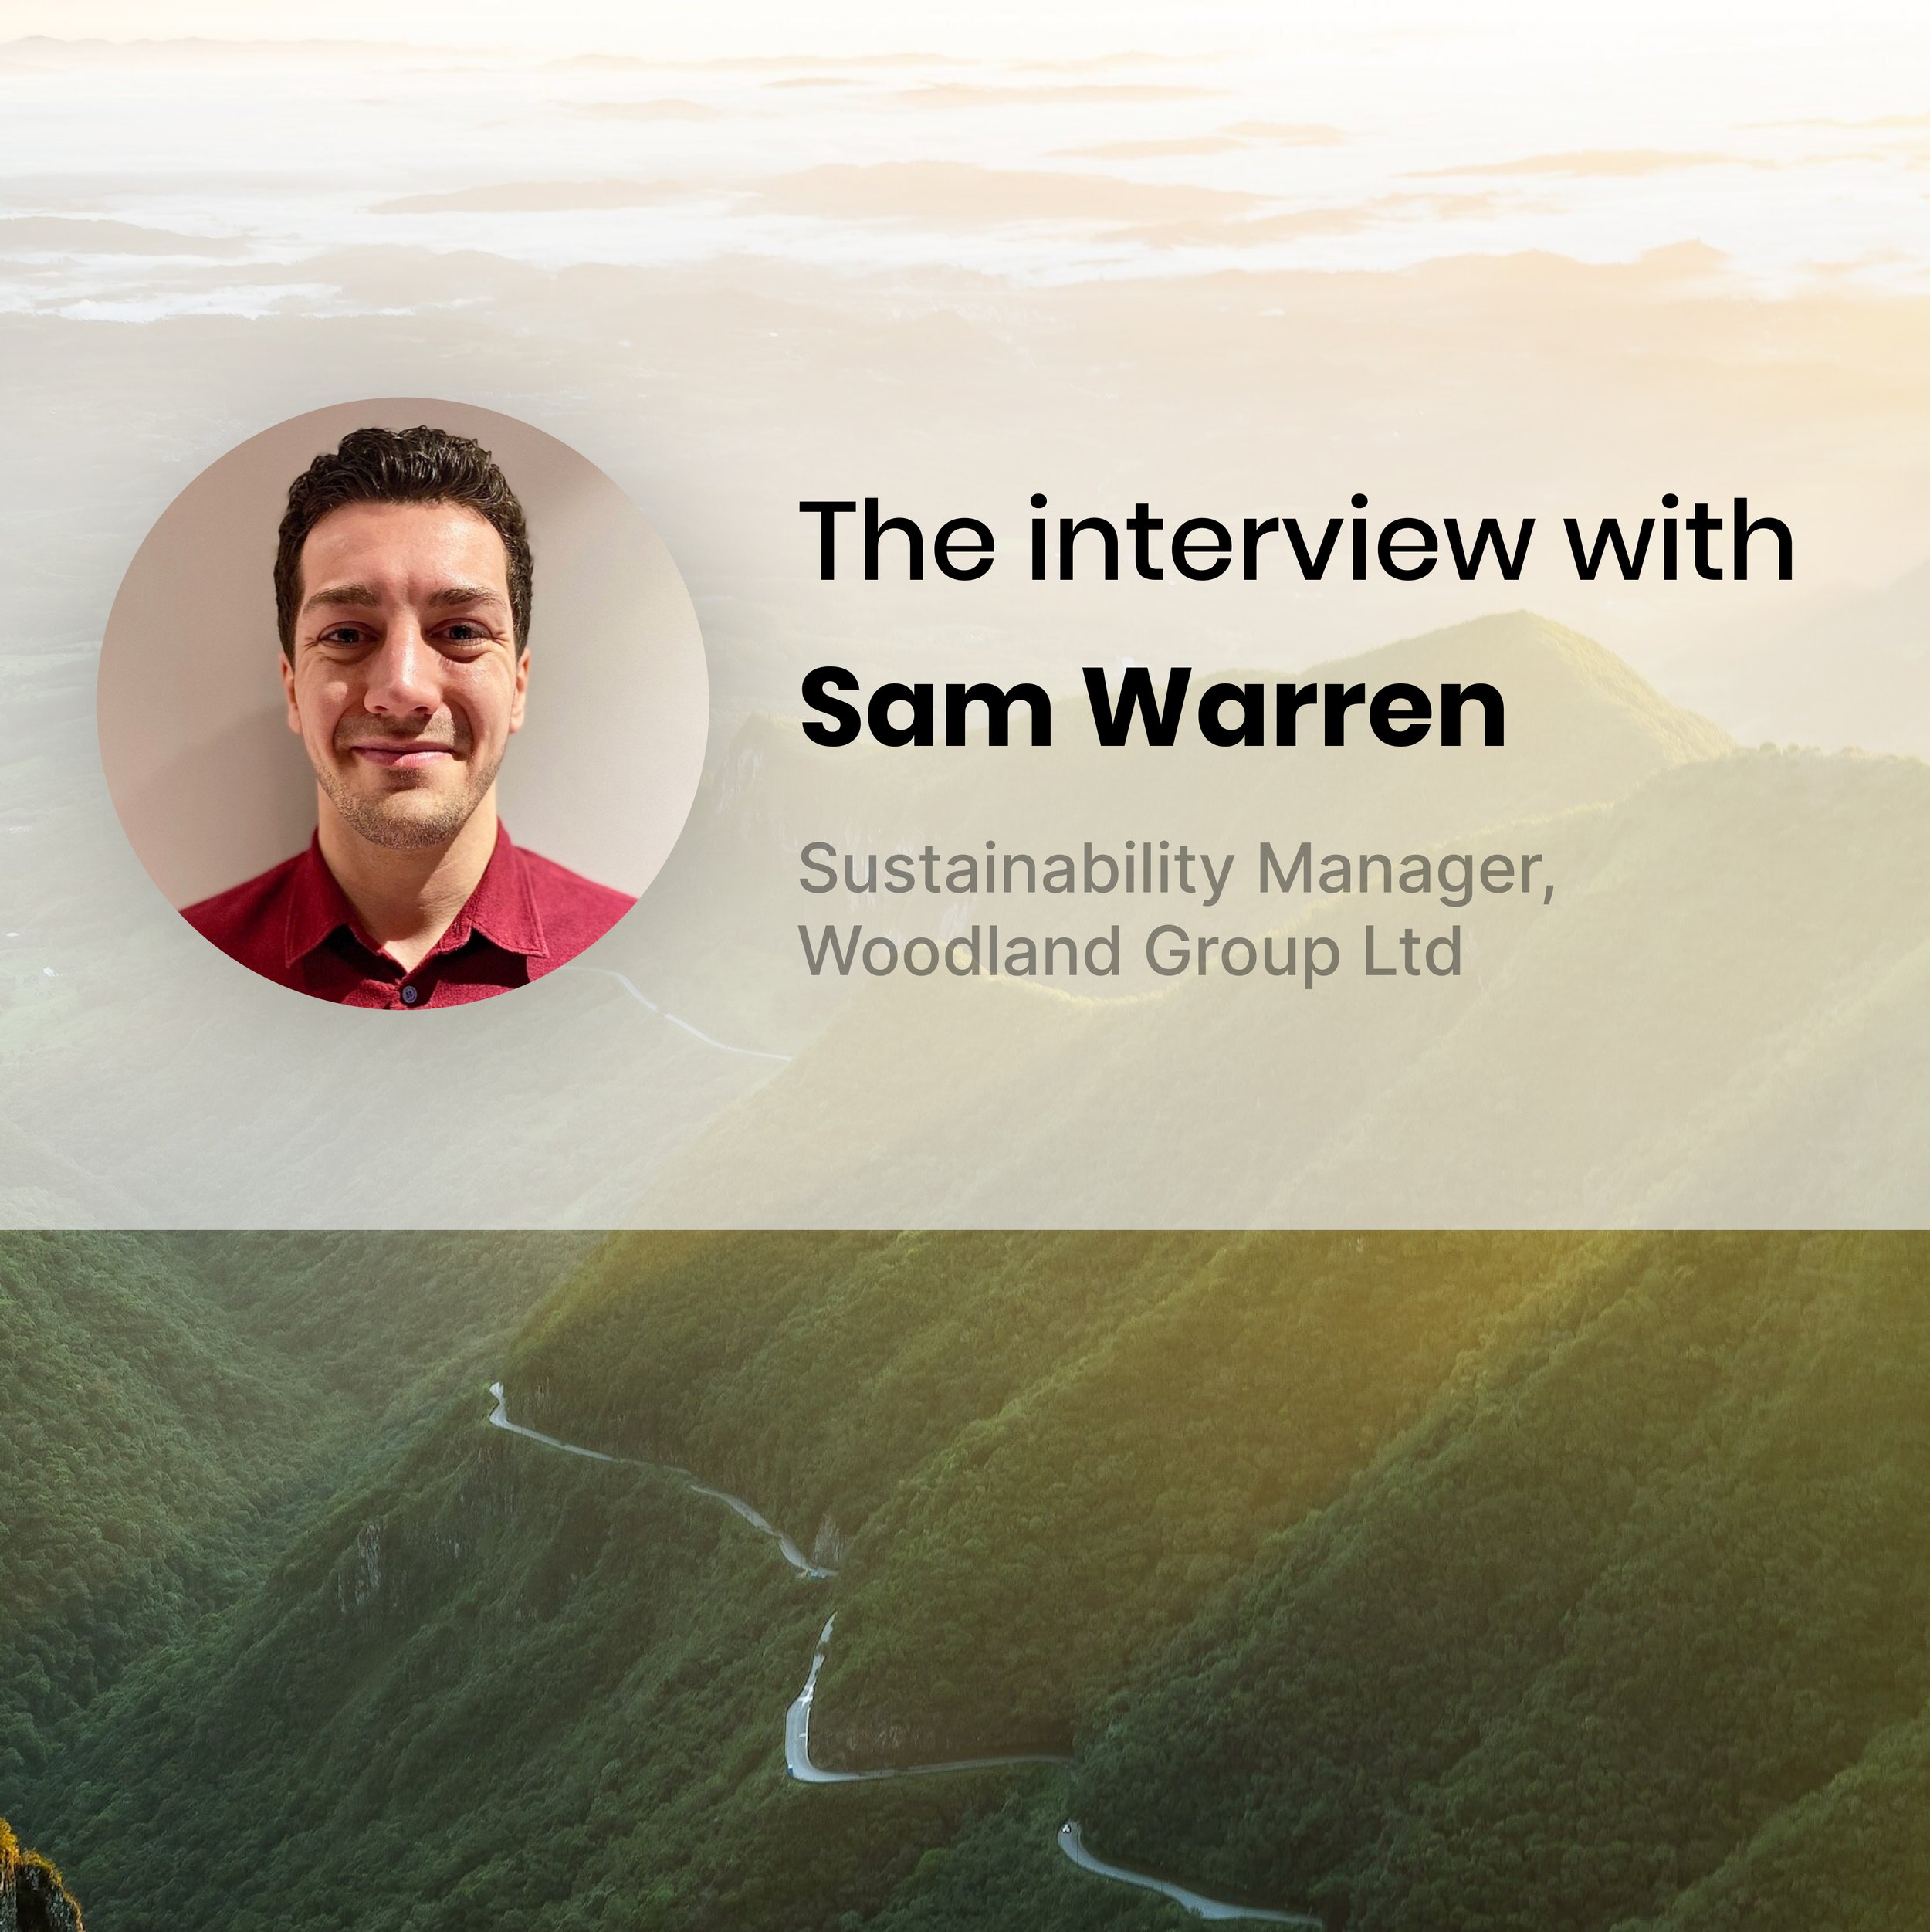 Establishing Sustainability within a Company: The Interview with Sam Warren